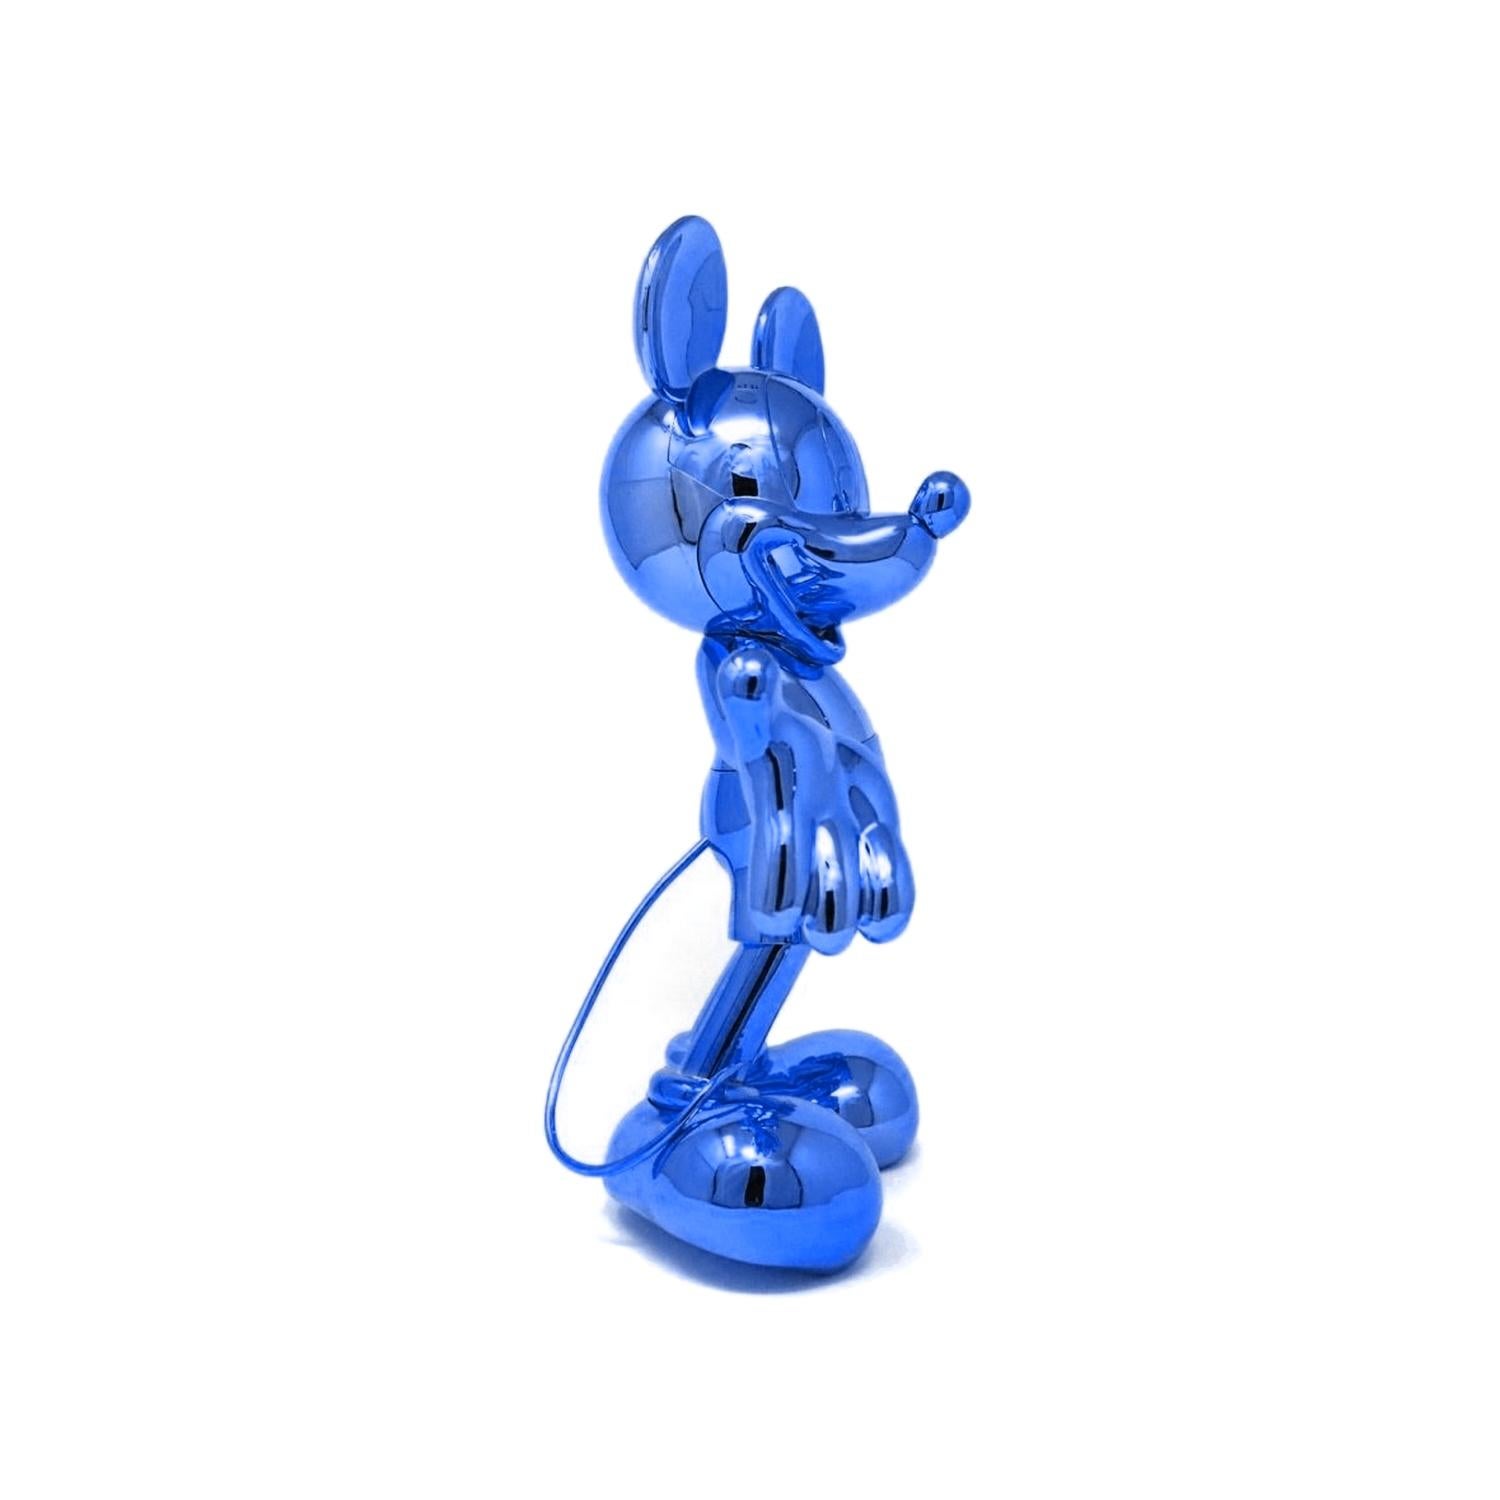 Modern In Stock in Los Angeles, Mickey Mouse Metallic Chrome Blue Pop Sculpture Figurine